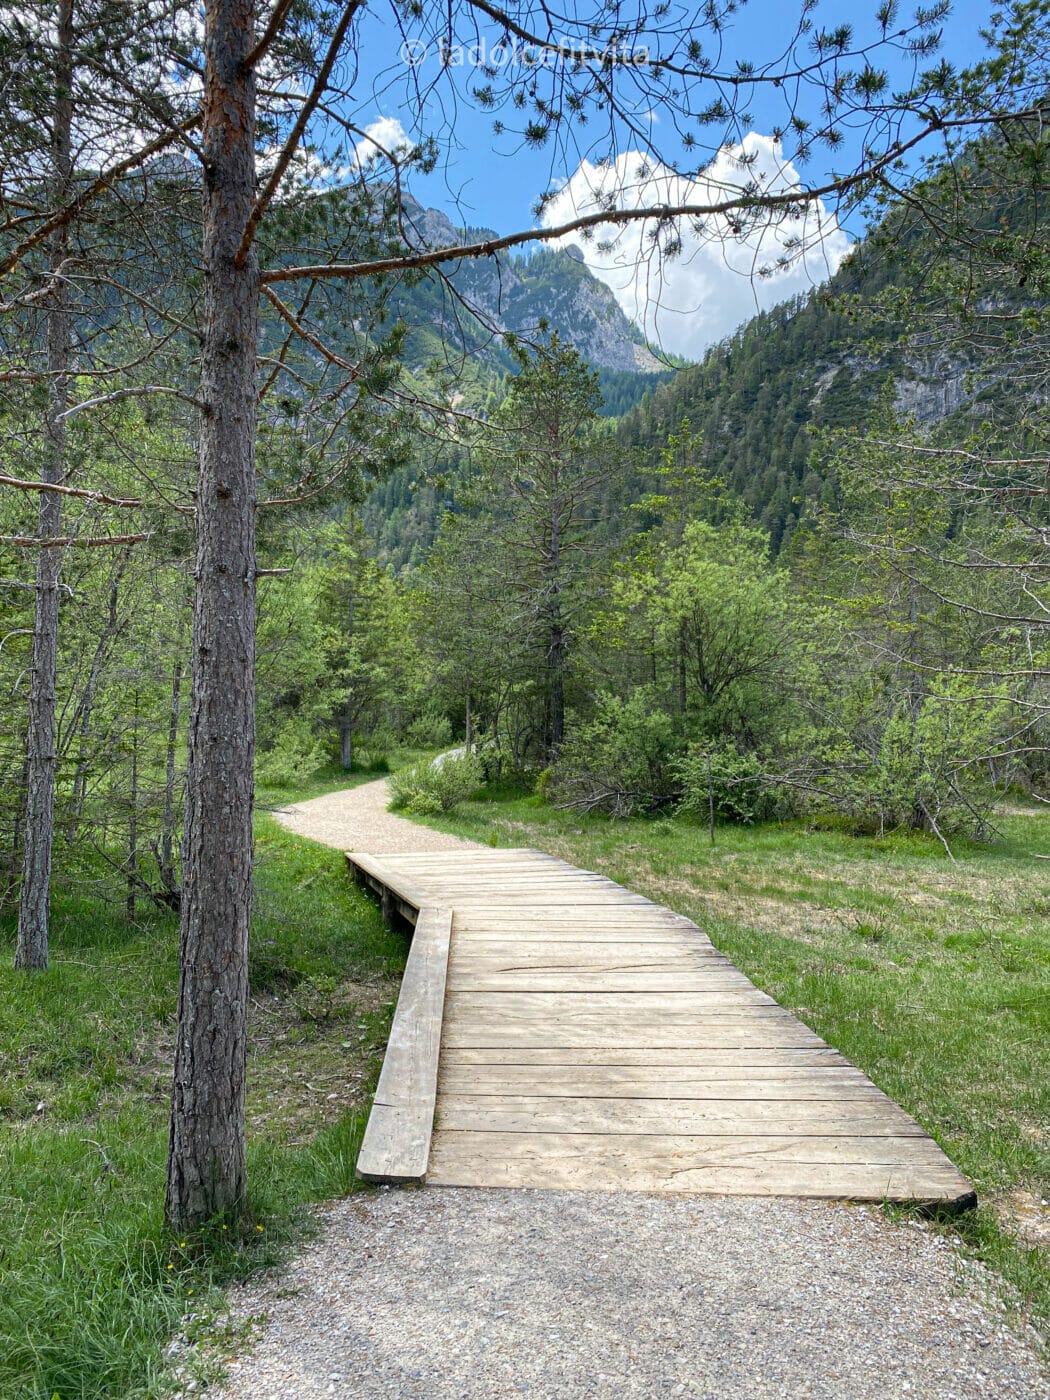 wooden boardwalk floating above grassy area with mountains in the background